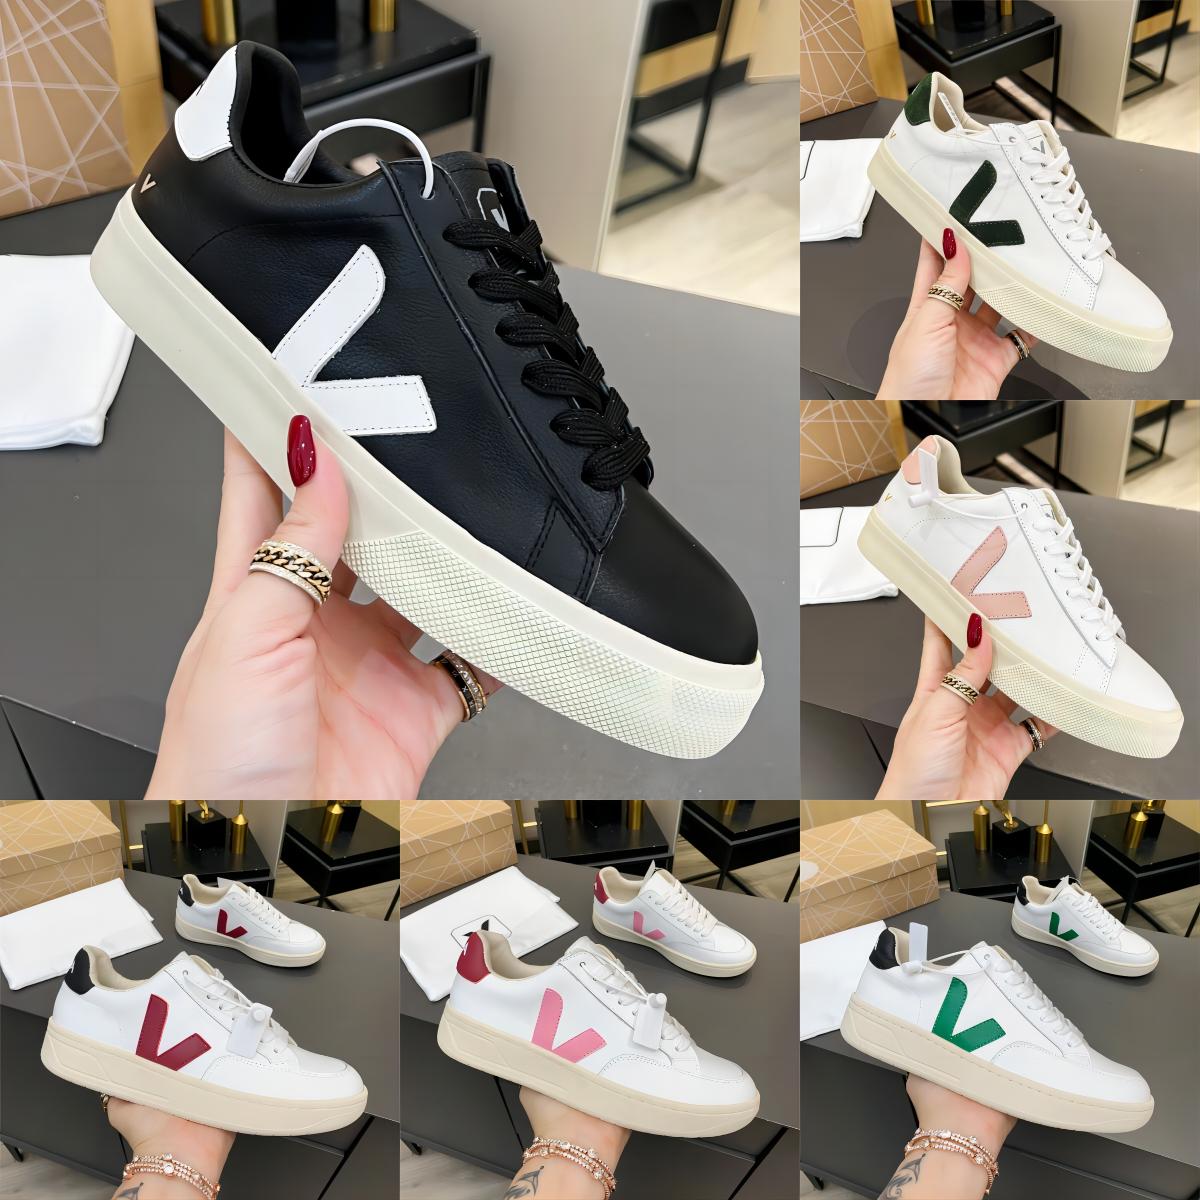 

Women Luxury veja Designer Shoes Men VA Word Leather White shoe Stitching Brown Lace Up Sneaker Leathers Lining Rubber Sole with Box Size 35-45, Color8